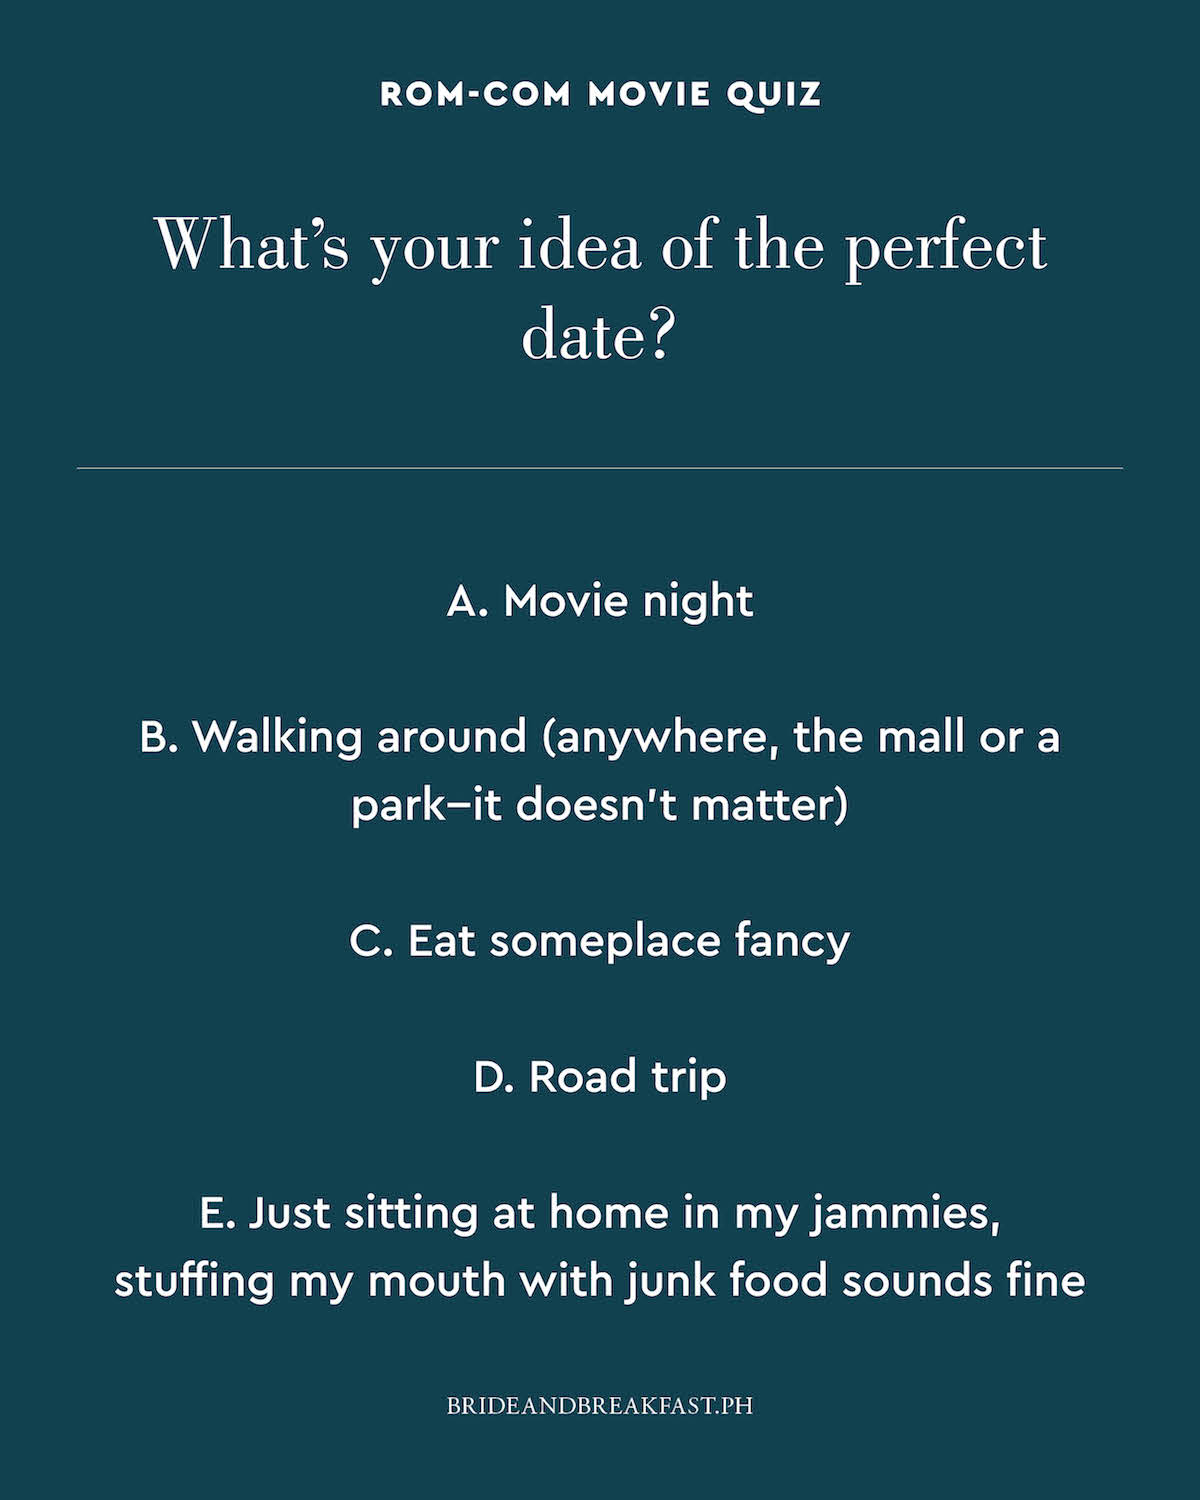 What's your idea of the perfect date? A. Movie night B. Walking around (anywhere, the mall or a park--it doesn't matter) C. Eat someplace fancy D. Road trip E. Just sitting at home in my jammies, stuffing my mouth with junk food sounds fine